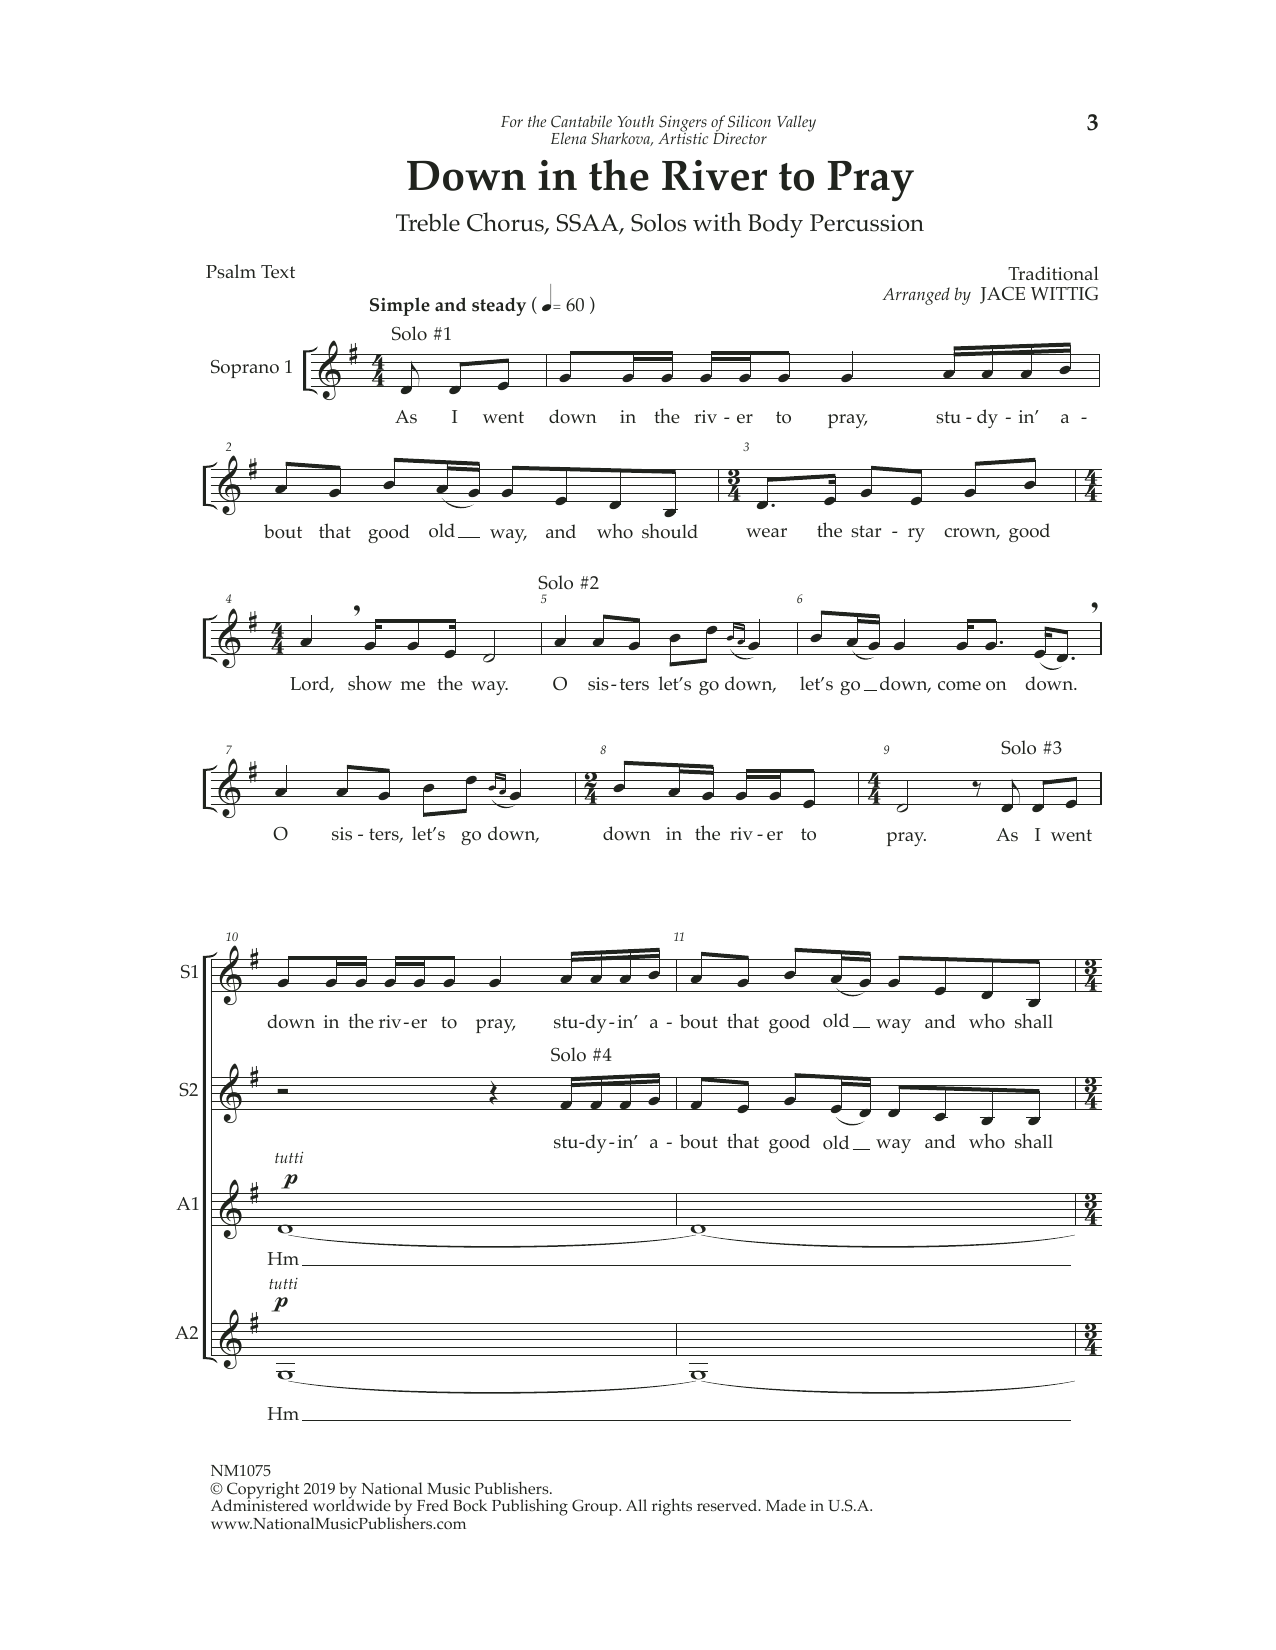 Download Jace Wittig Down in the River to Pray Sheet Music